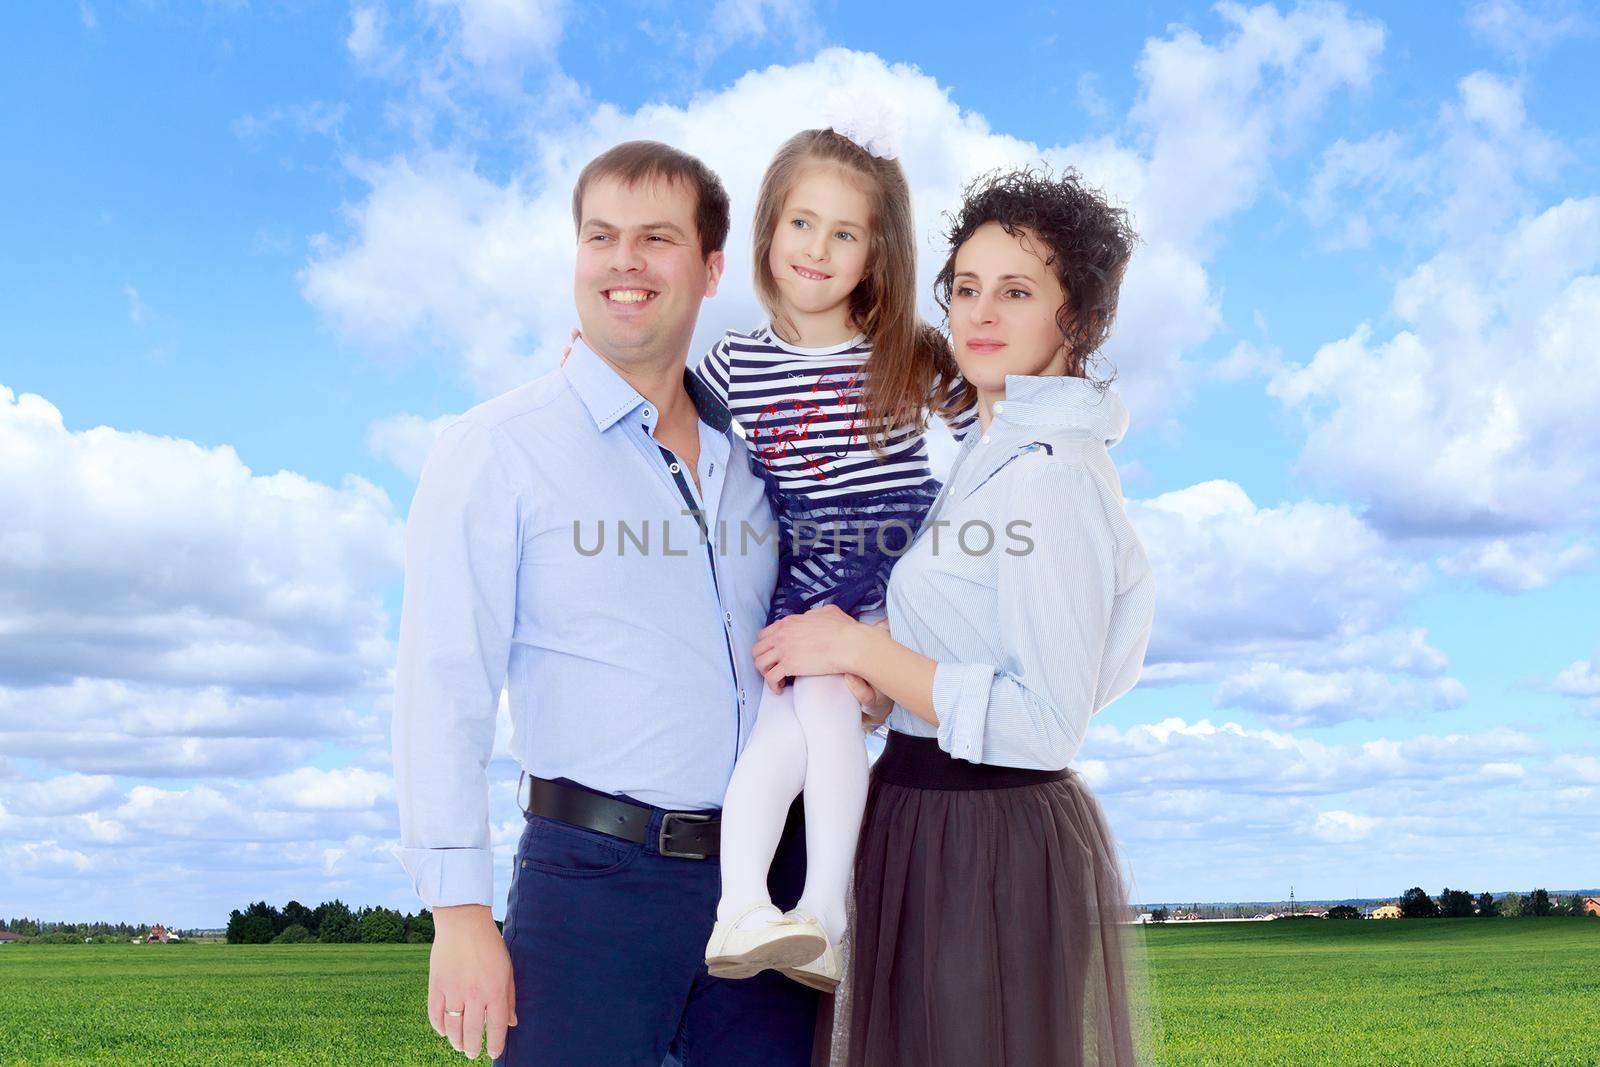 Happy young family, mom dad and little daughter.Parents keep the girl in her arms , and she hugs their neck.On the background of green grass and blue sky with clouds.